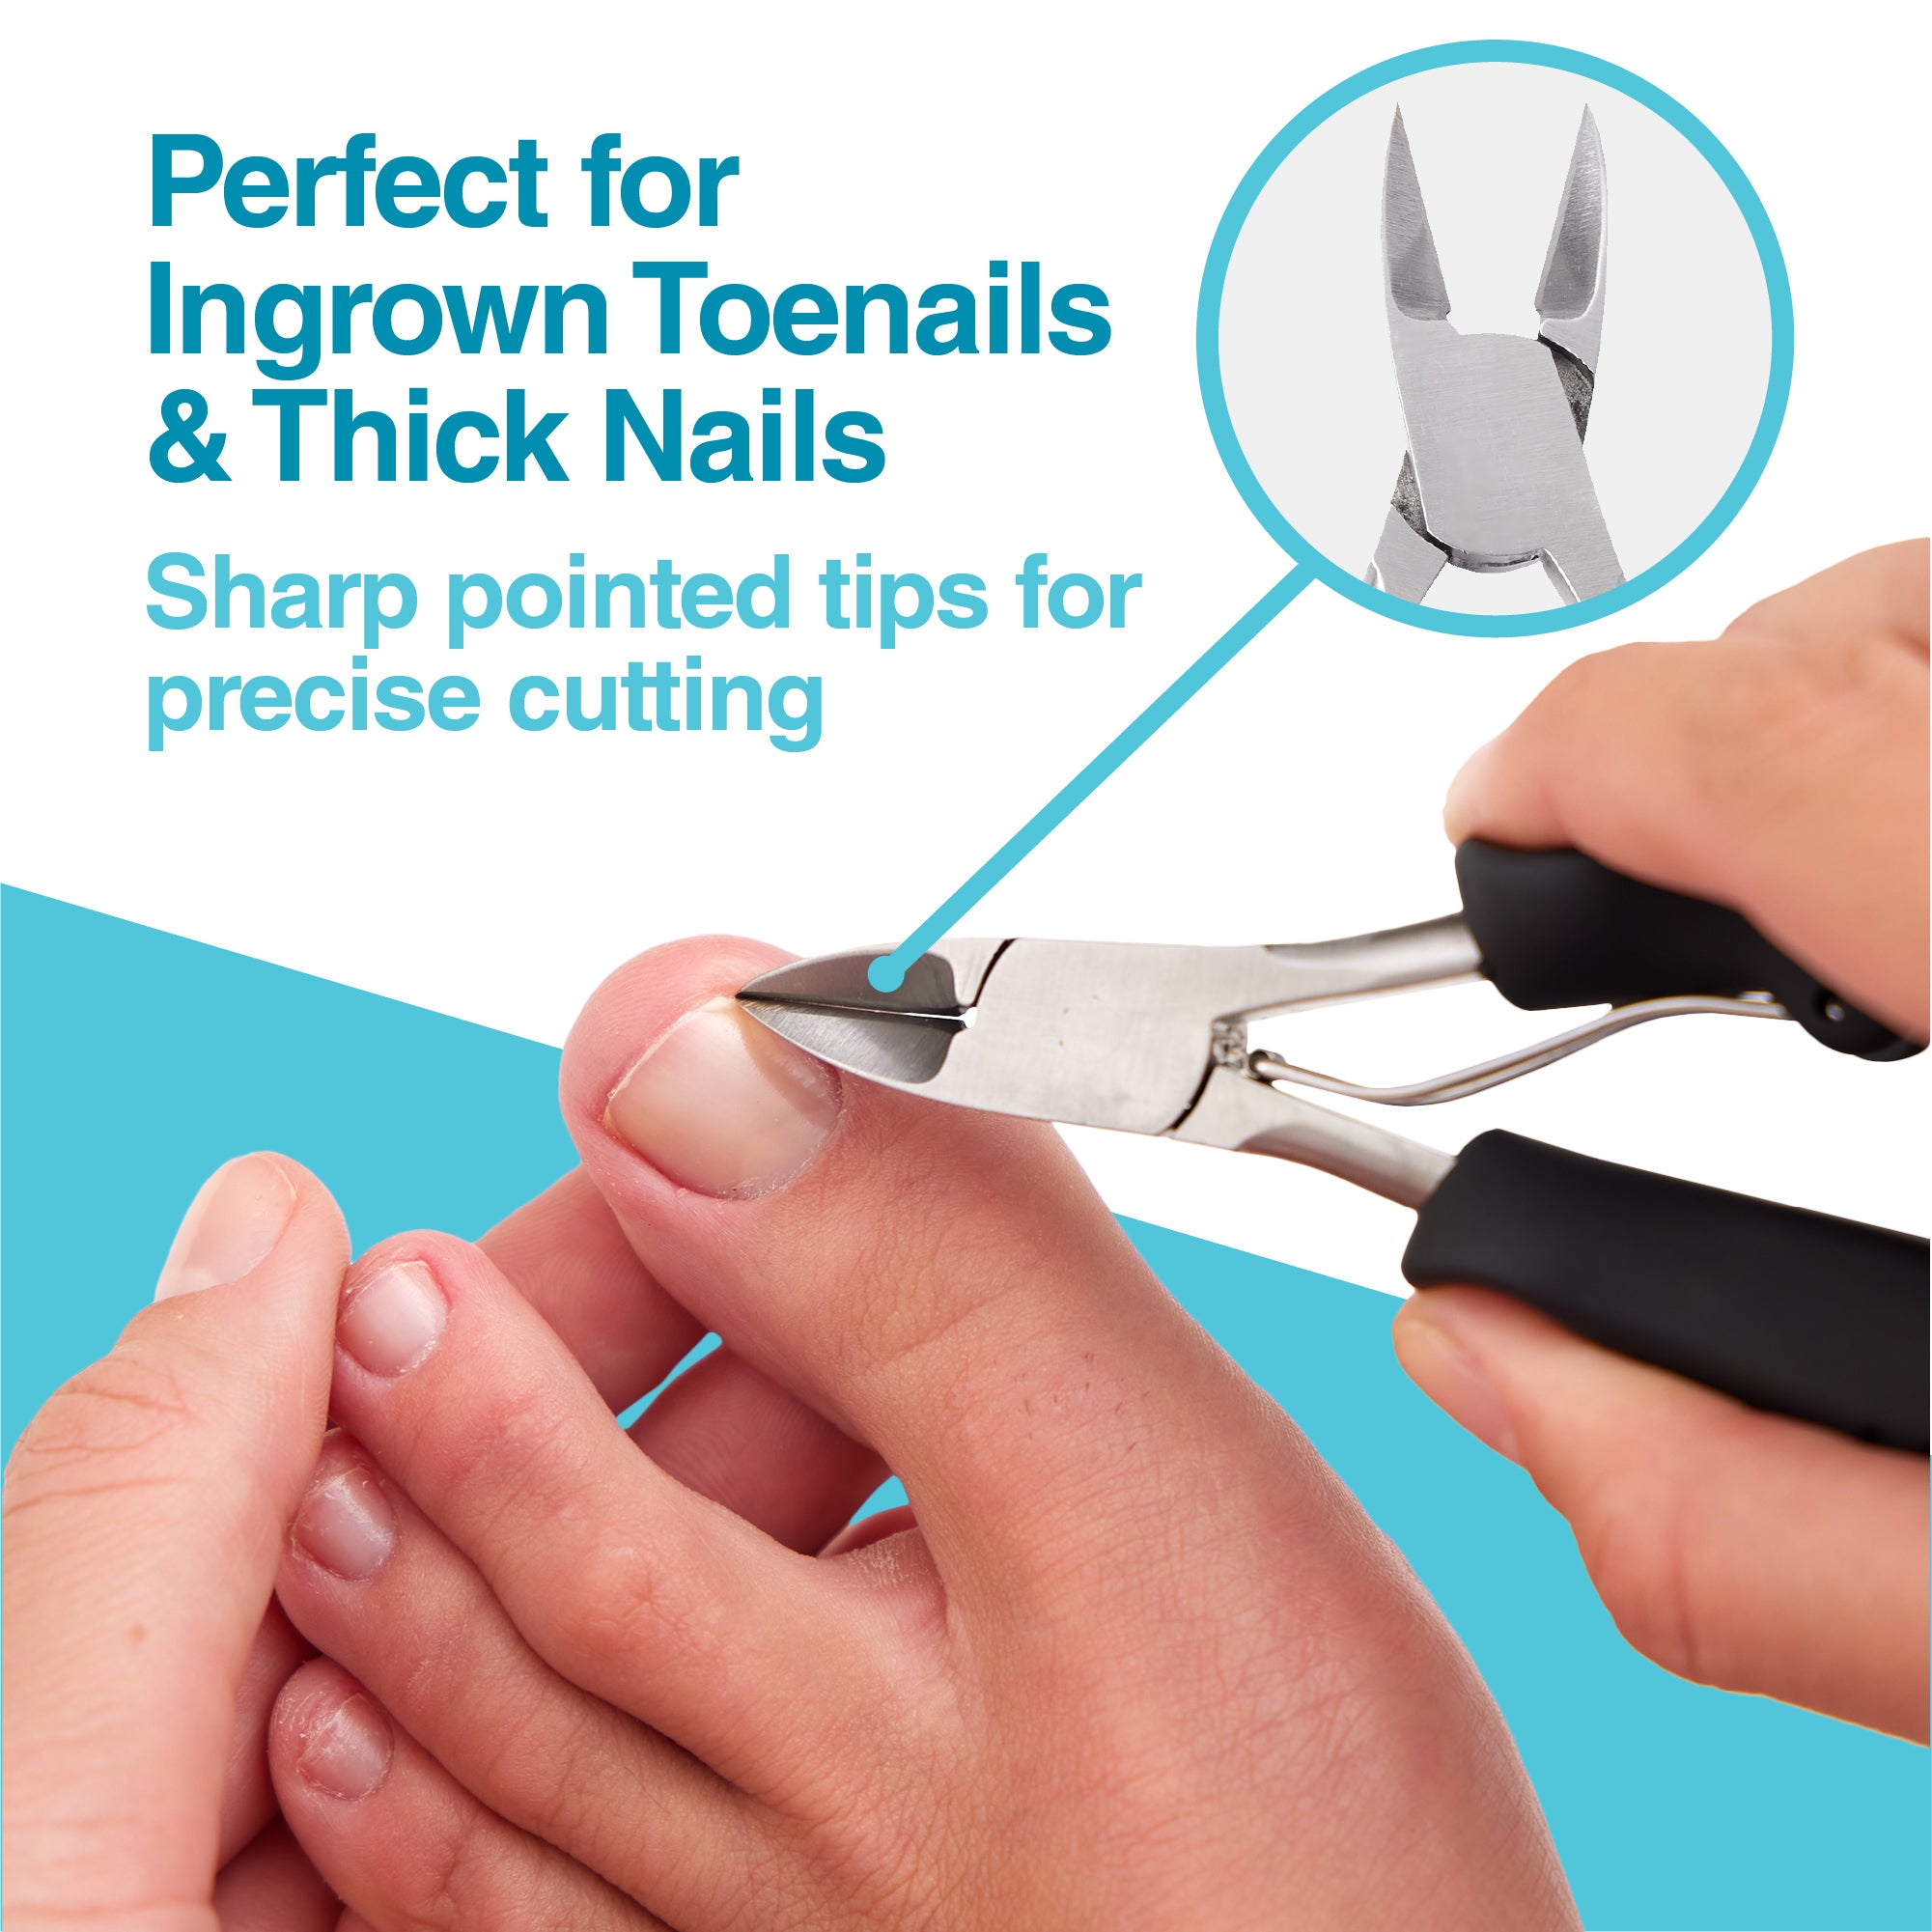 how to use ingrown toenail clippers